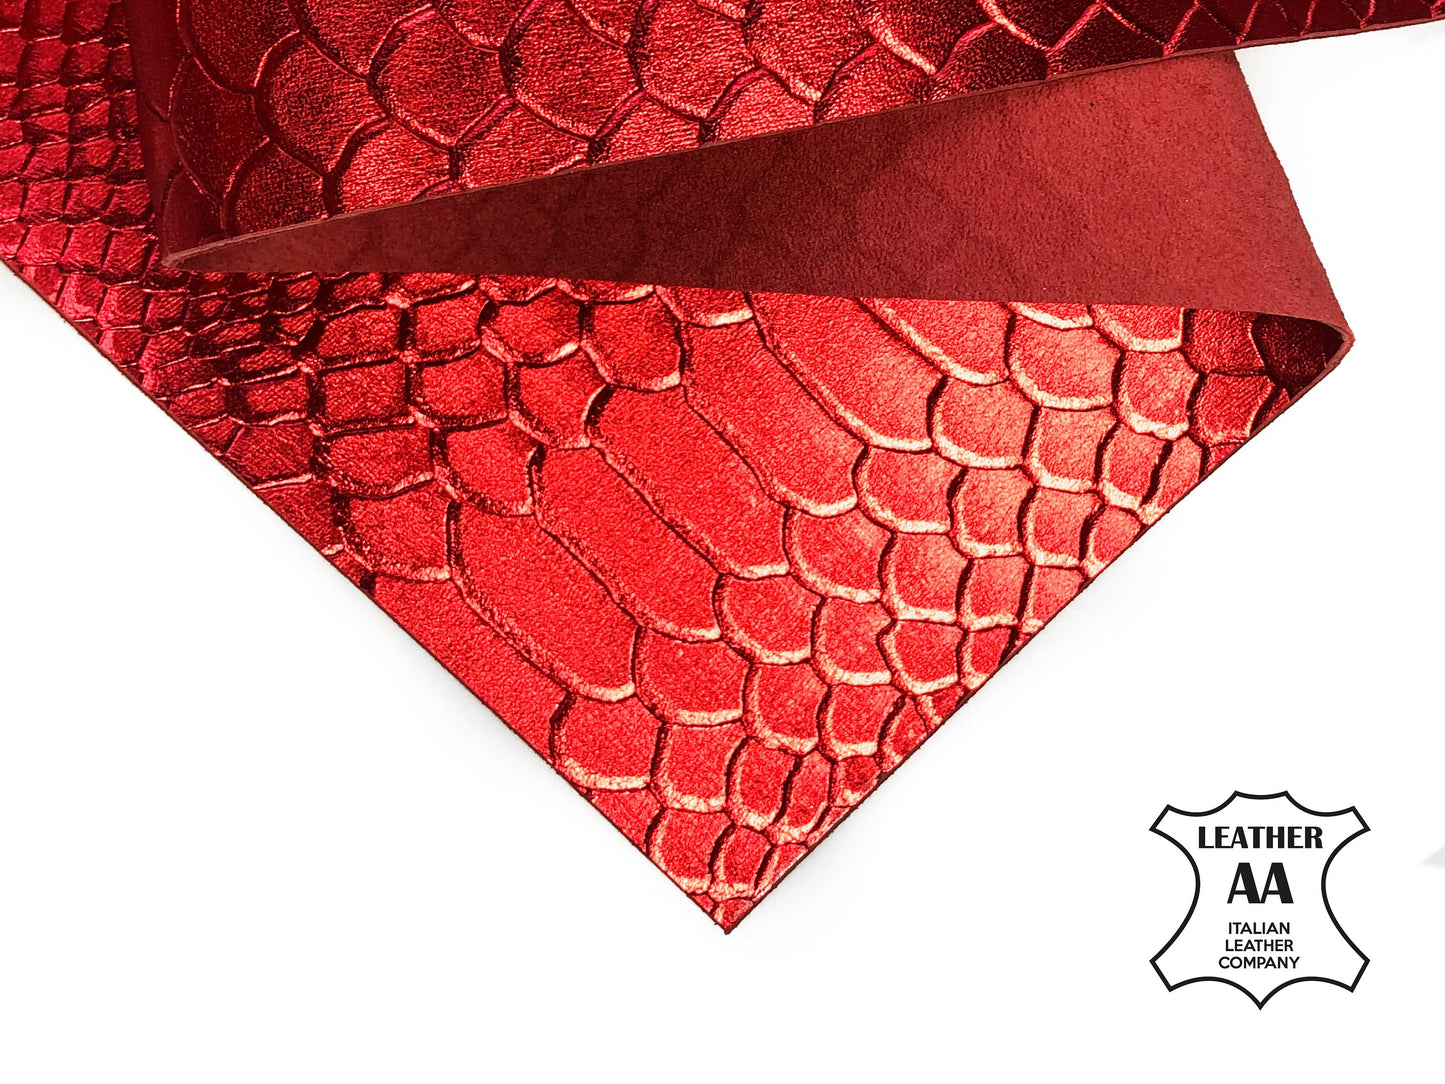 Red Metallic Lambskin Sheets With Print 0.8mm/2oz / CHISTMAS SNAKE 1024